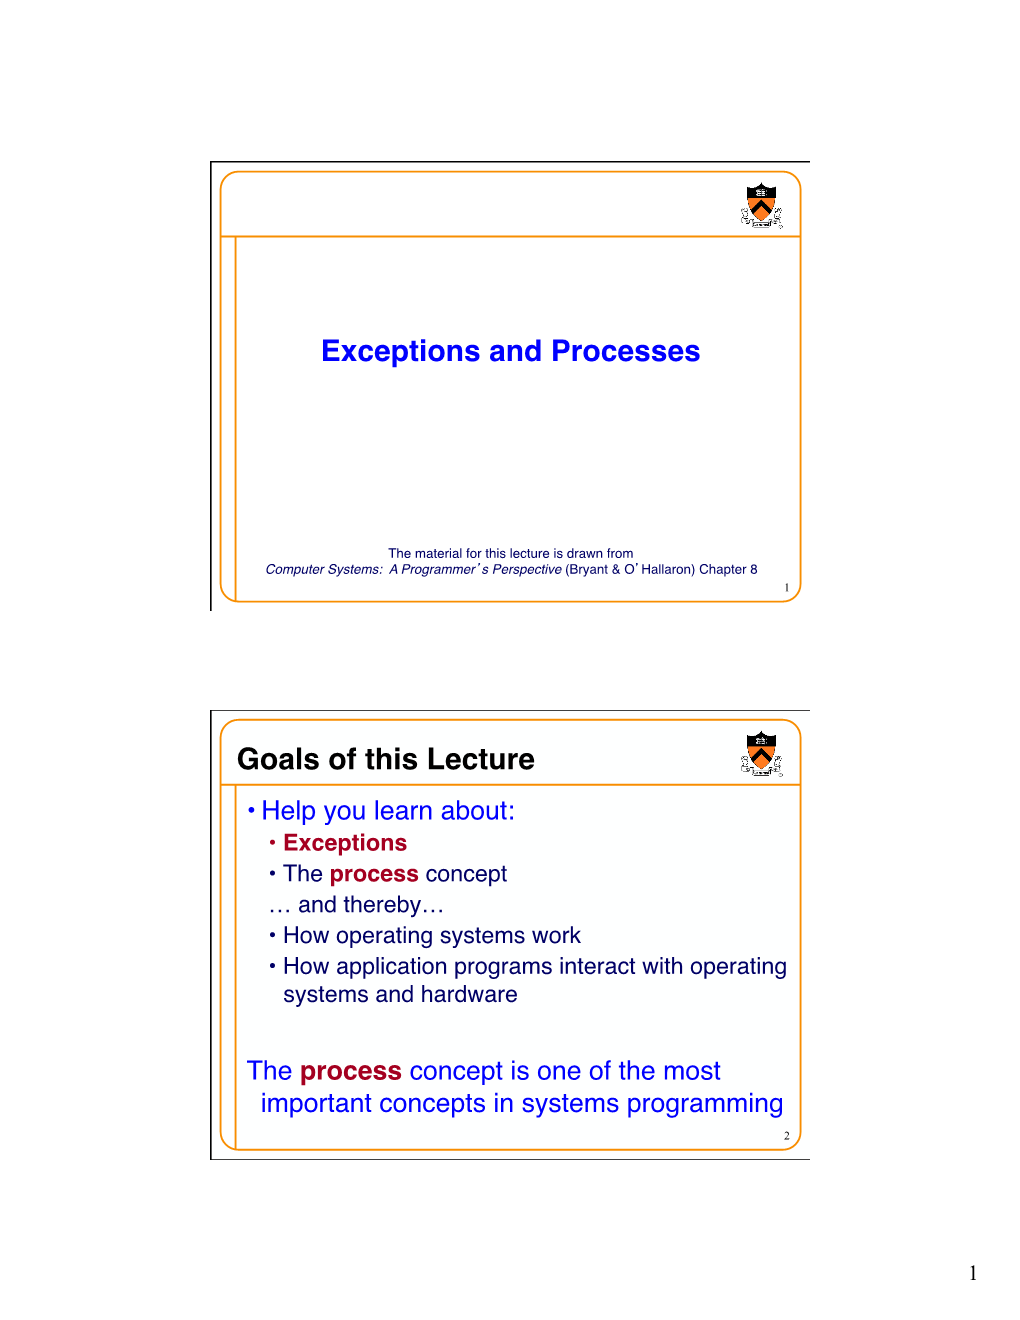 Exceptions and Processes Goals of This Lecture